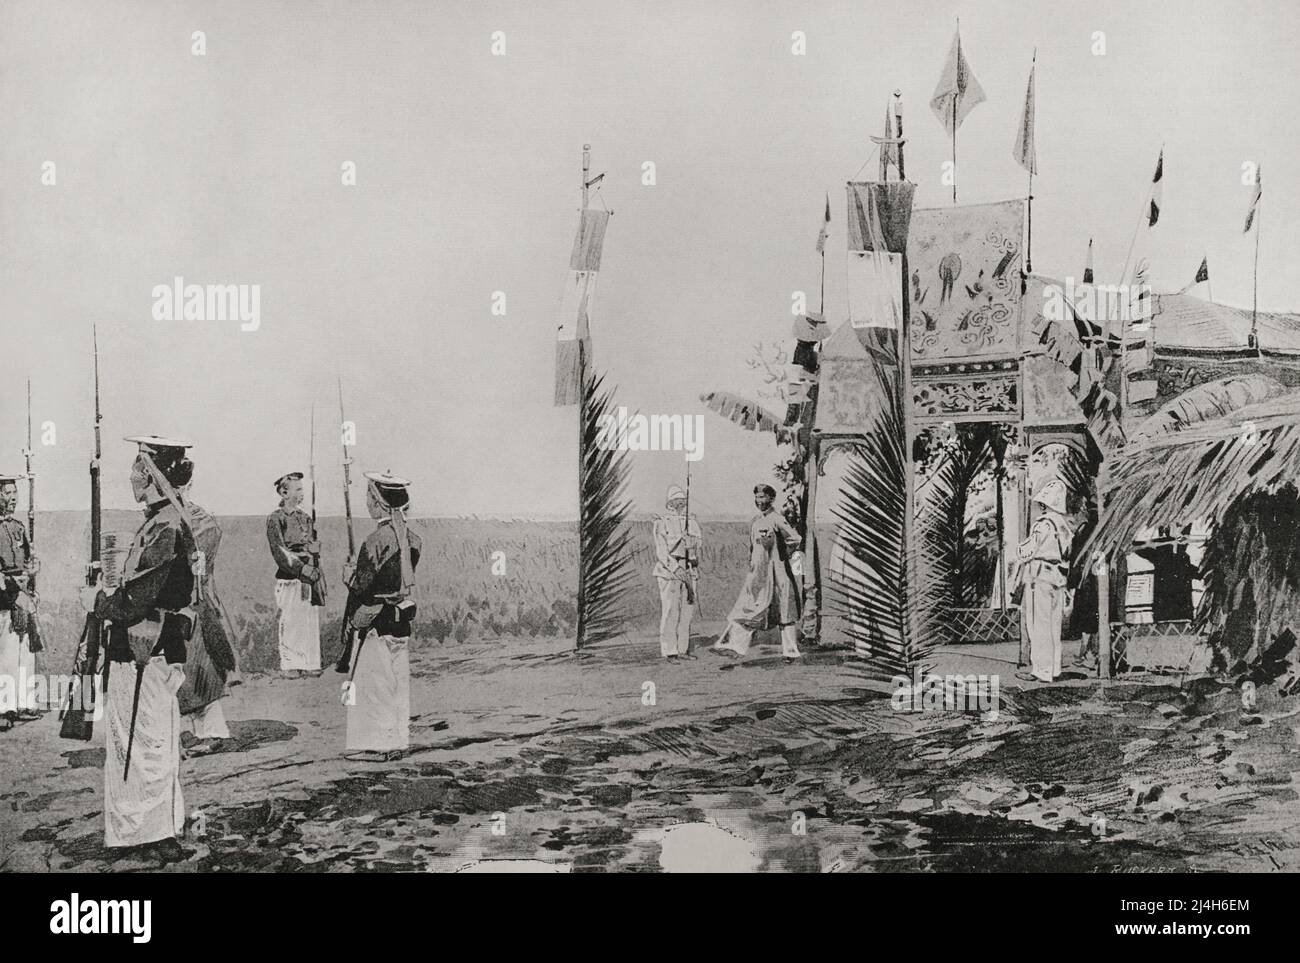 Thanh Thai (ruled 1889-1907). Emperor of Annam (Central Vietnam). Nguyen dynasty. Go Cong (Cochinchina). Visit of the Emperor Thanh Thai to the tombs of his ancestors. Photoengraving. La Ilustración Española y Americana, 1898. Stock Photo